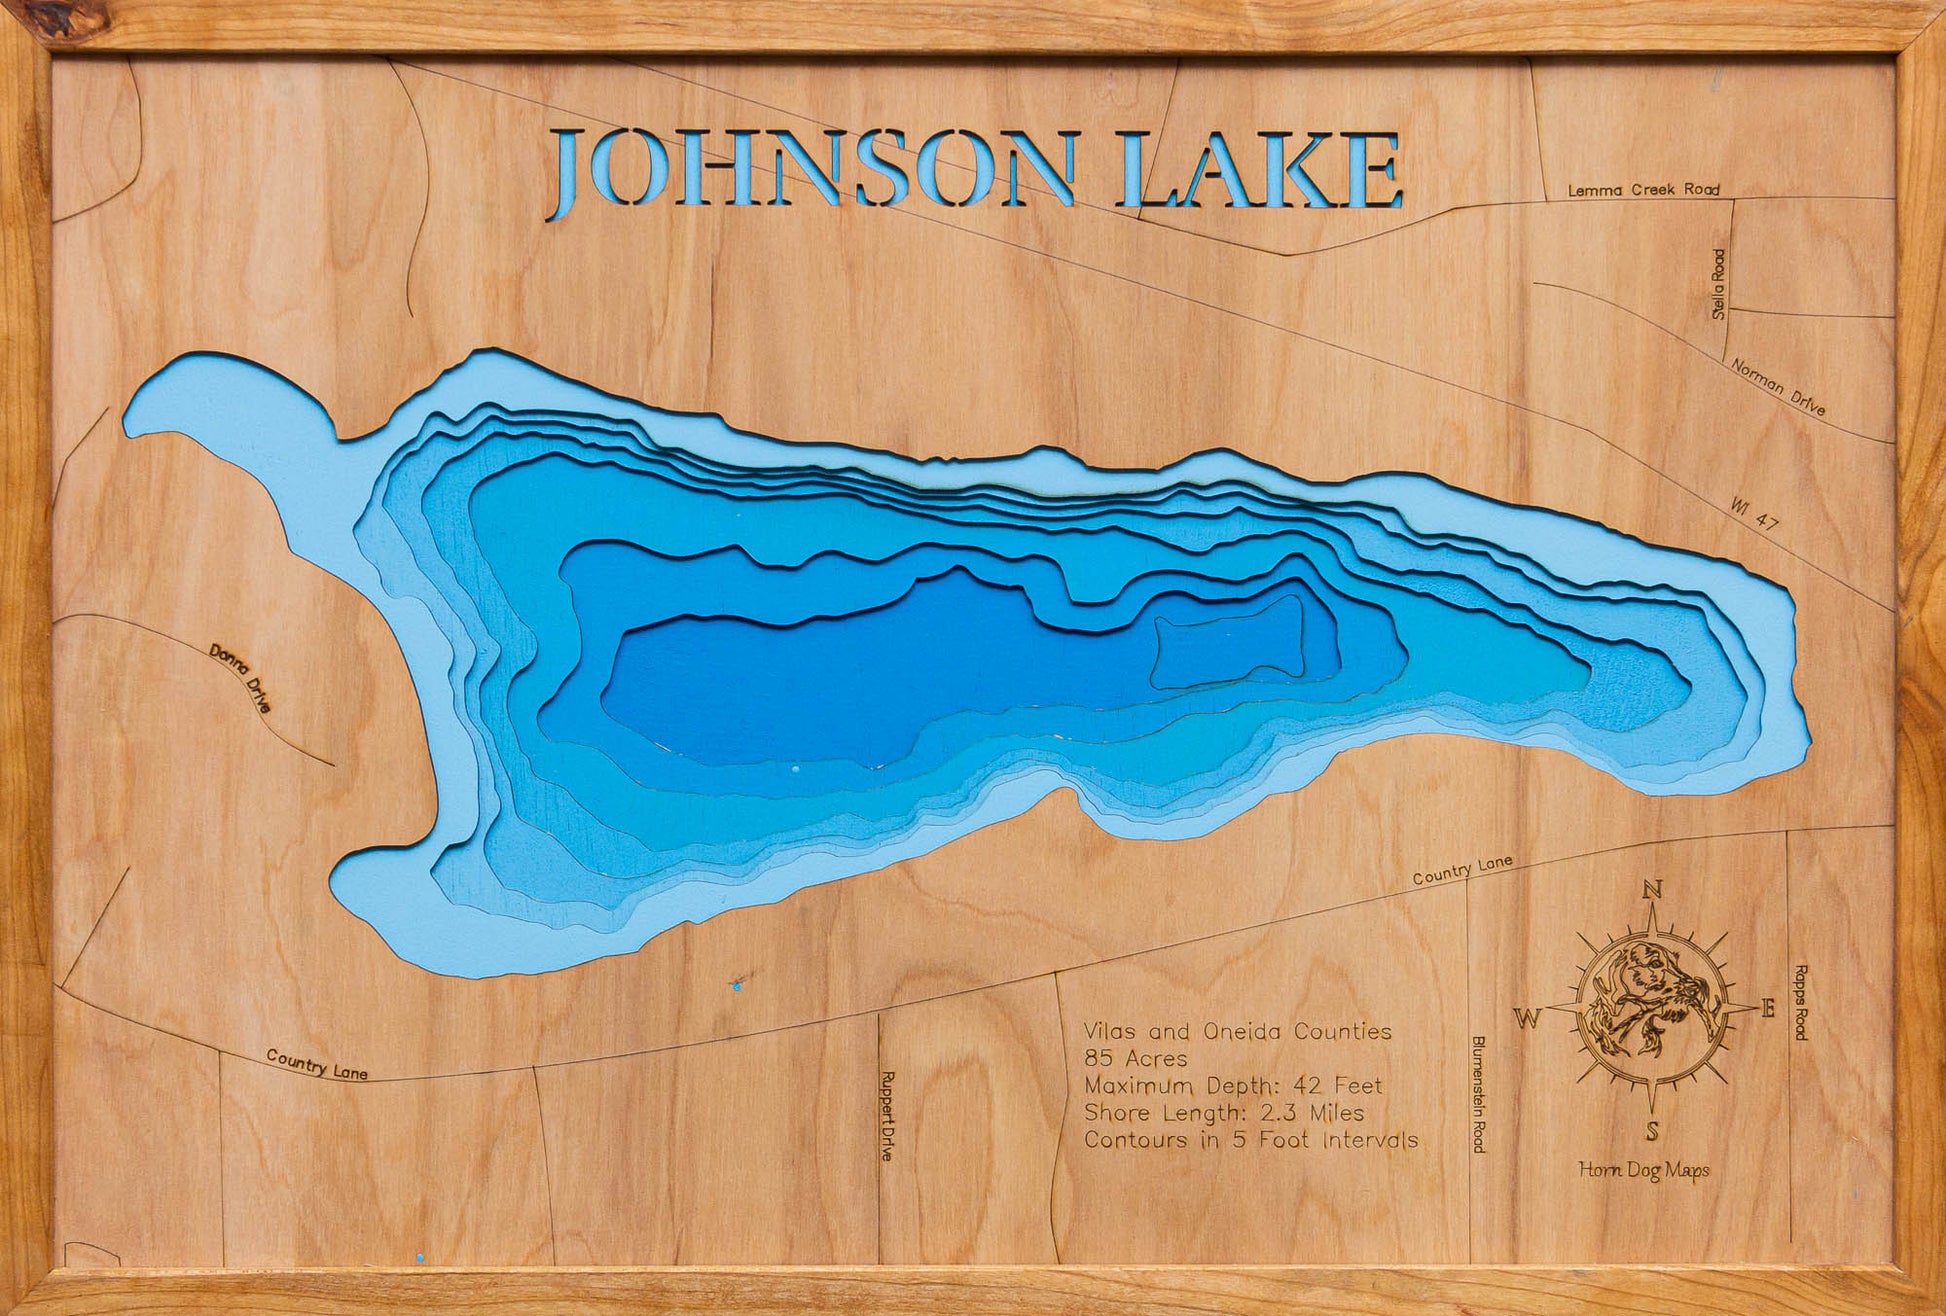 Johnson Lake in Vilas and Oneida Counties, WI